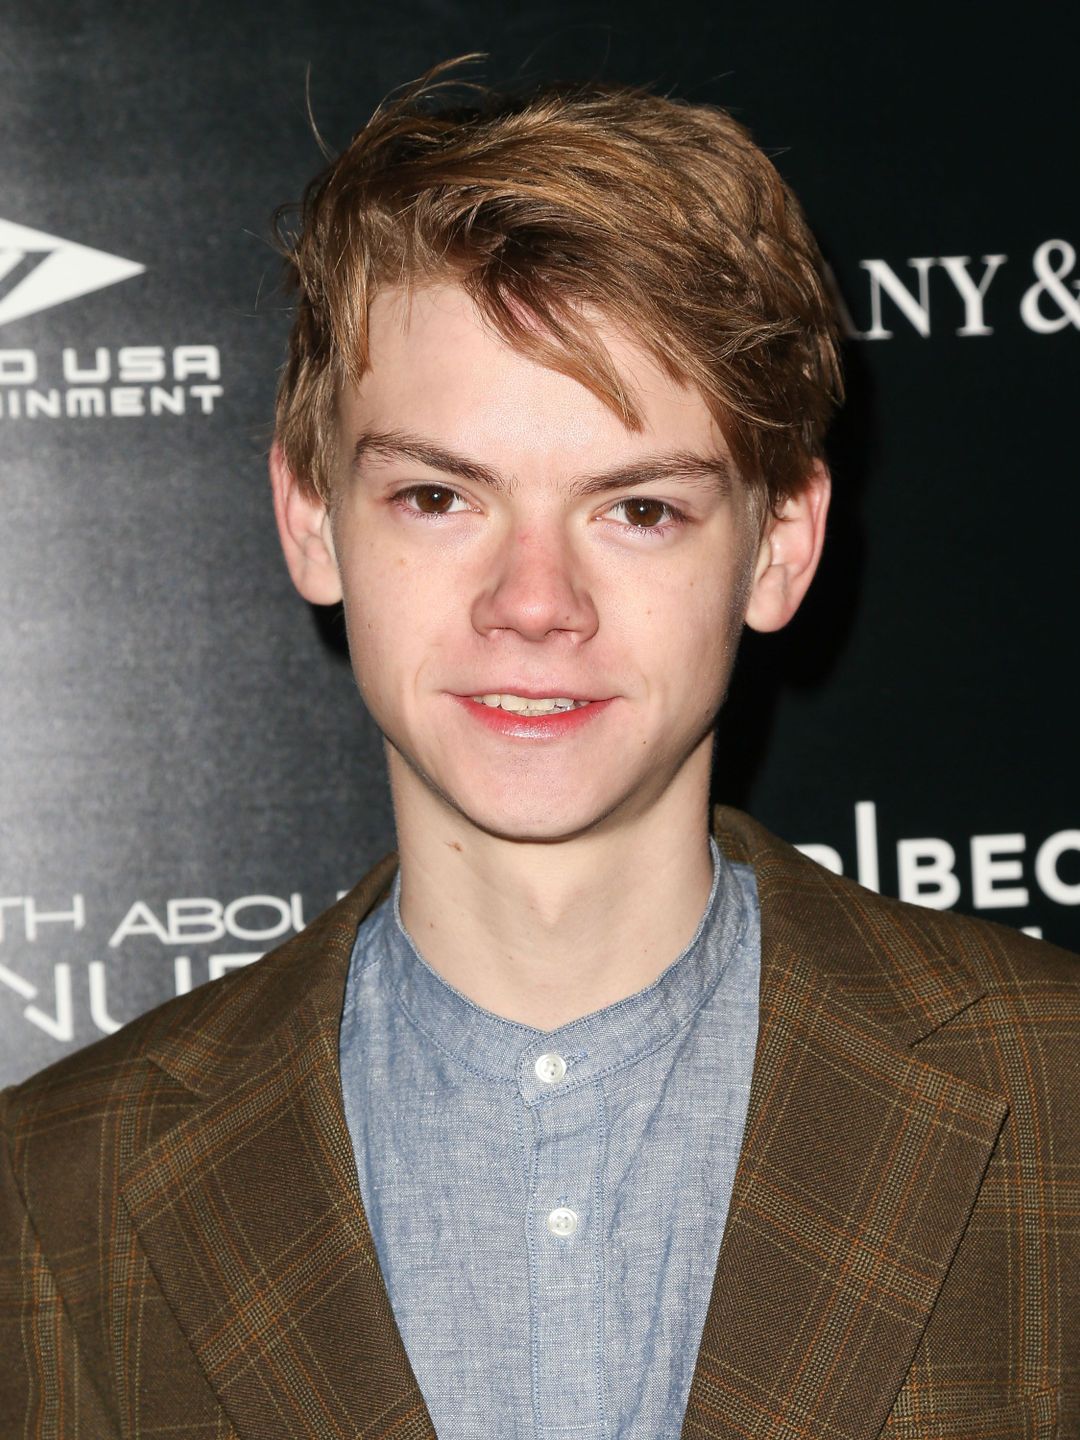 Thomas Sangster current look